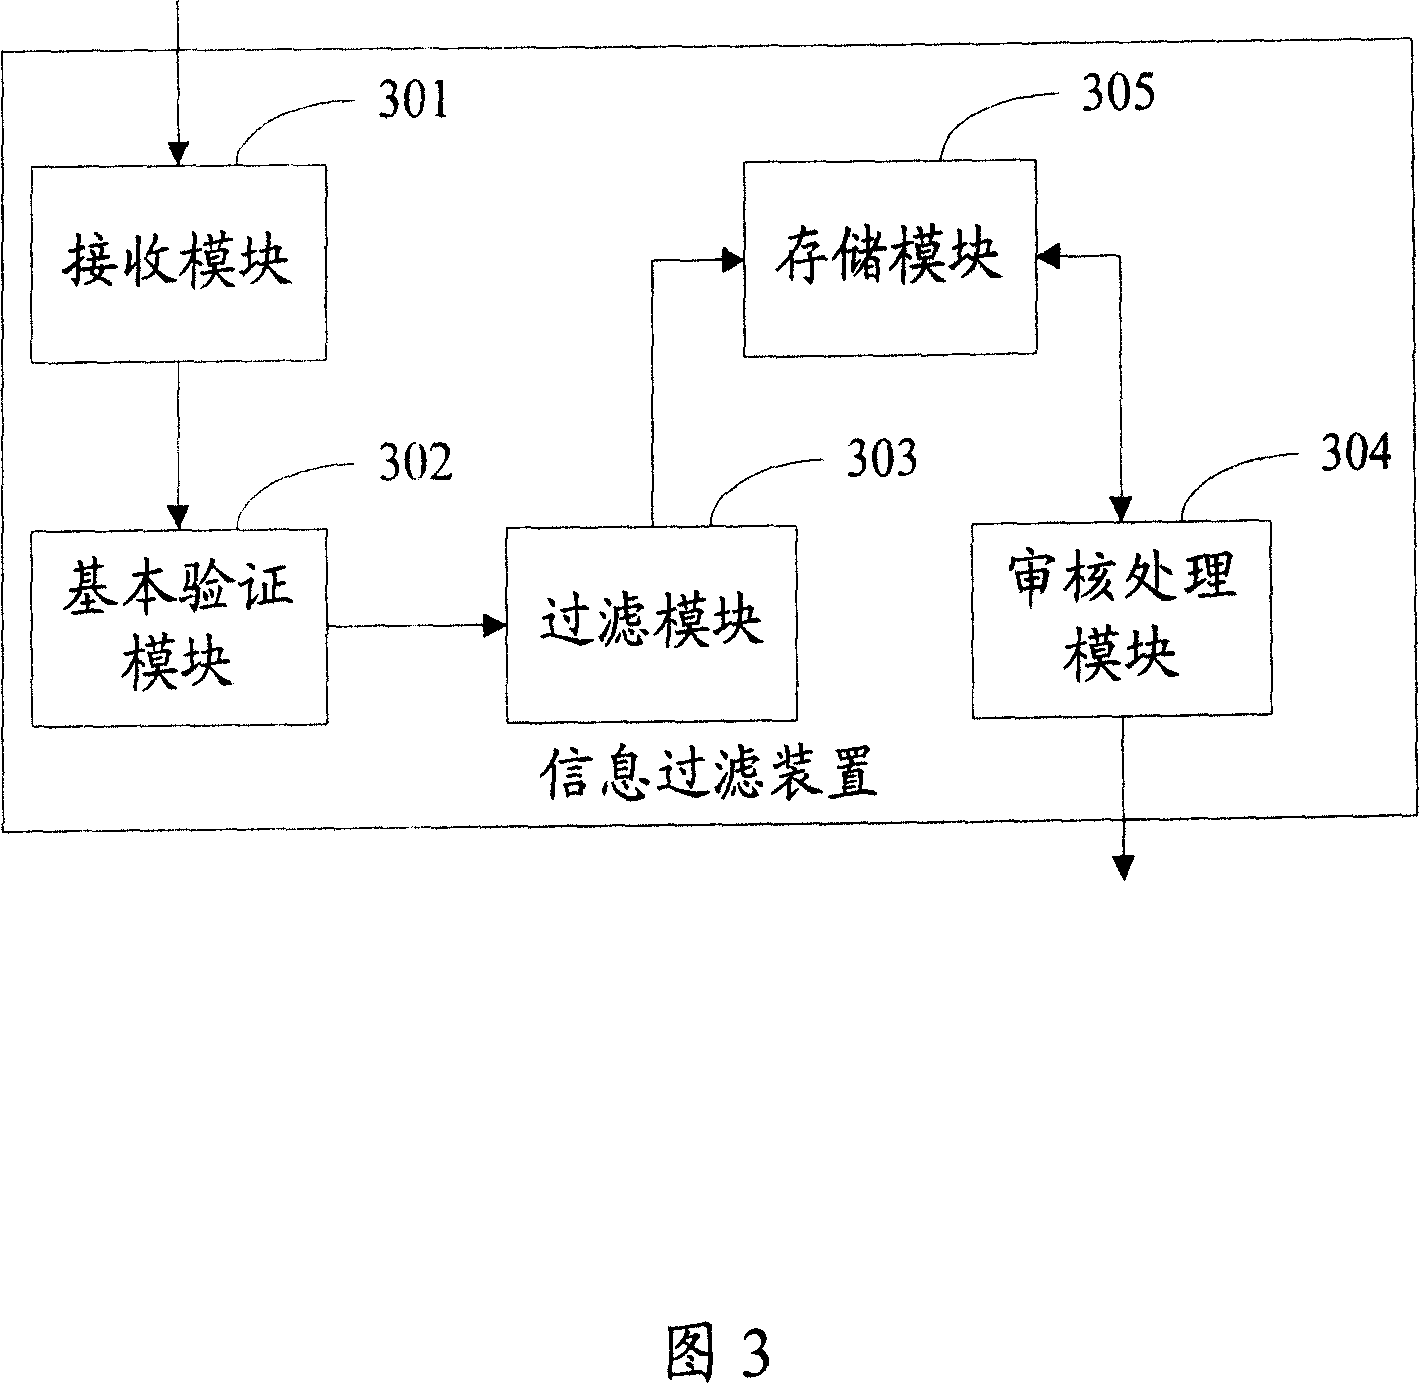 Method and system for filtering merchandise information